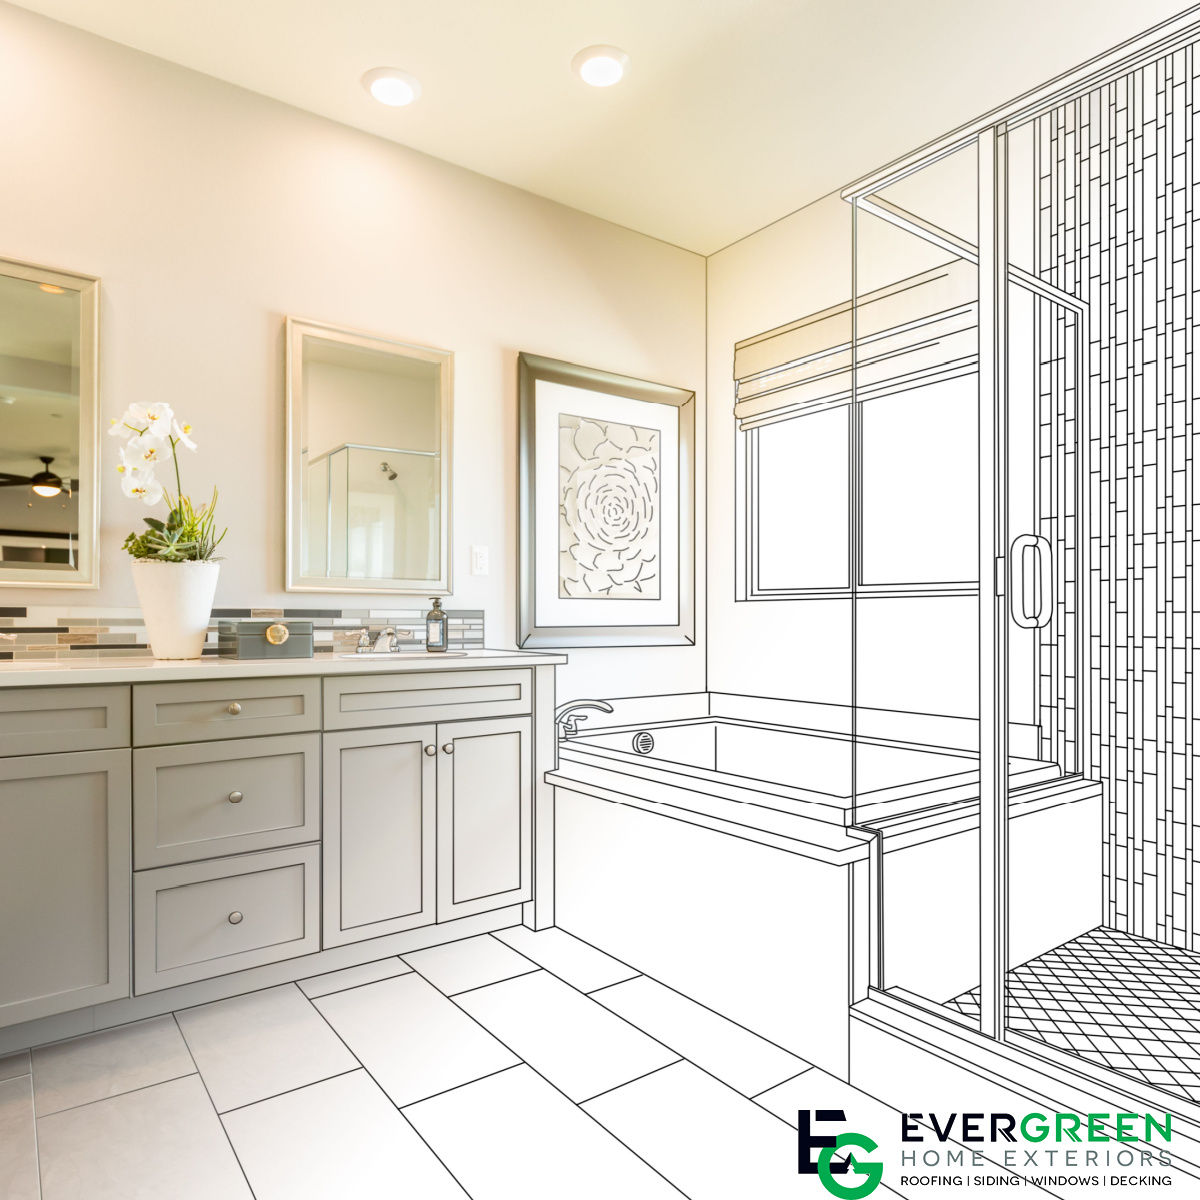 Transform Your Bathroom with Evergreen Home Exteriors in Bremerton